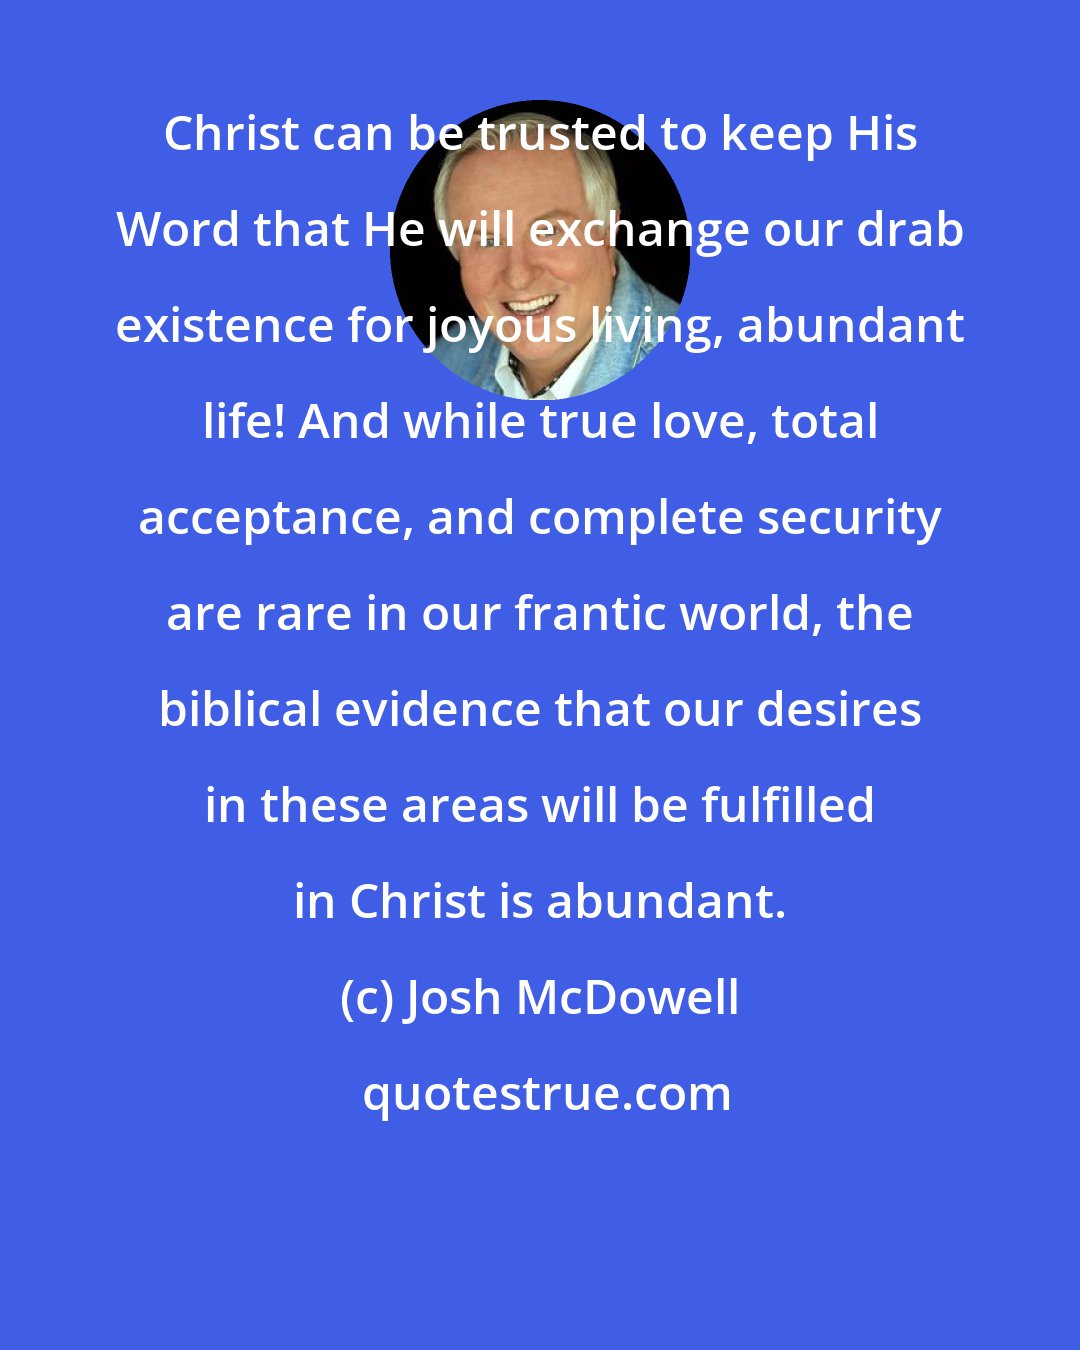 Josh McDowell: Christ can be trusted to keep His Word that He will exchange our drab existence for joyous living, abundant life! And while true love, total acceptance, and complete security are rare in our frantic world, the biblical evidence that our desires in these areas will be fulfilled in Christ is abundant.